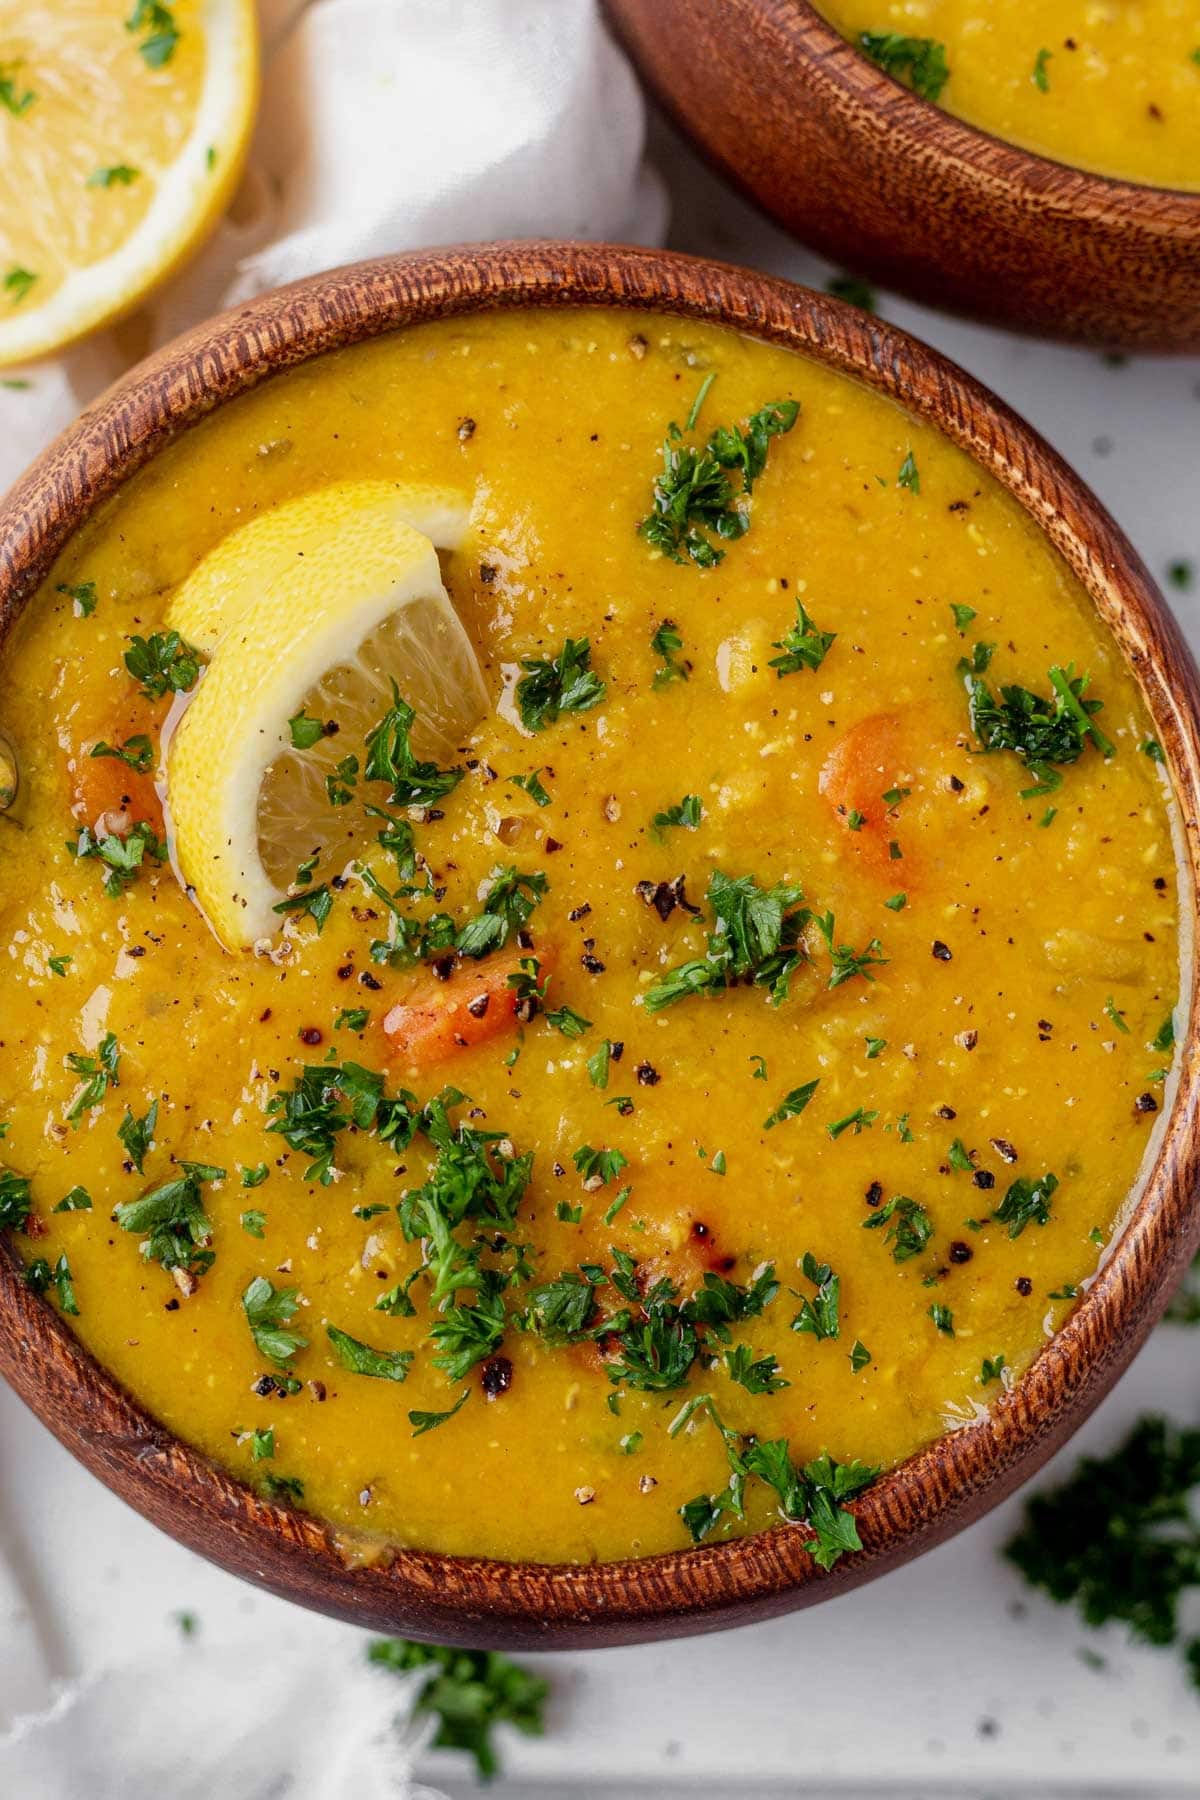 Lemon lentil soup with tumeric and herbs in a bowl- close up, top view